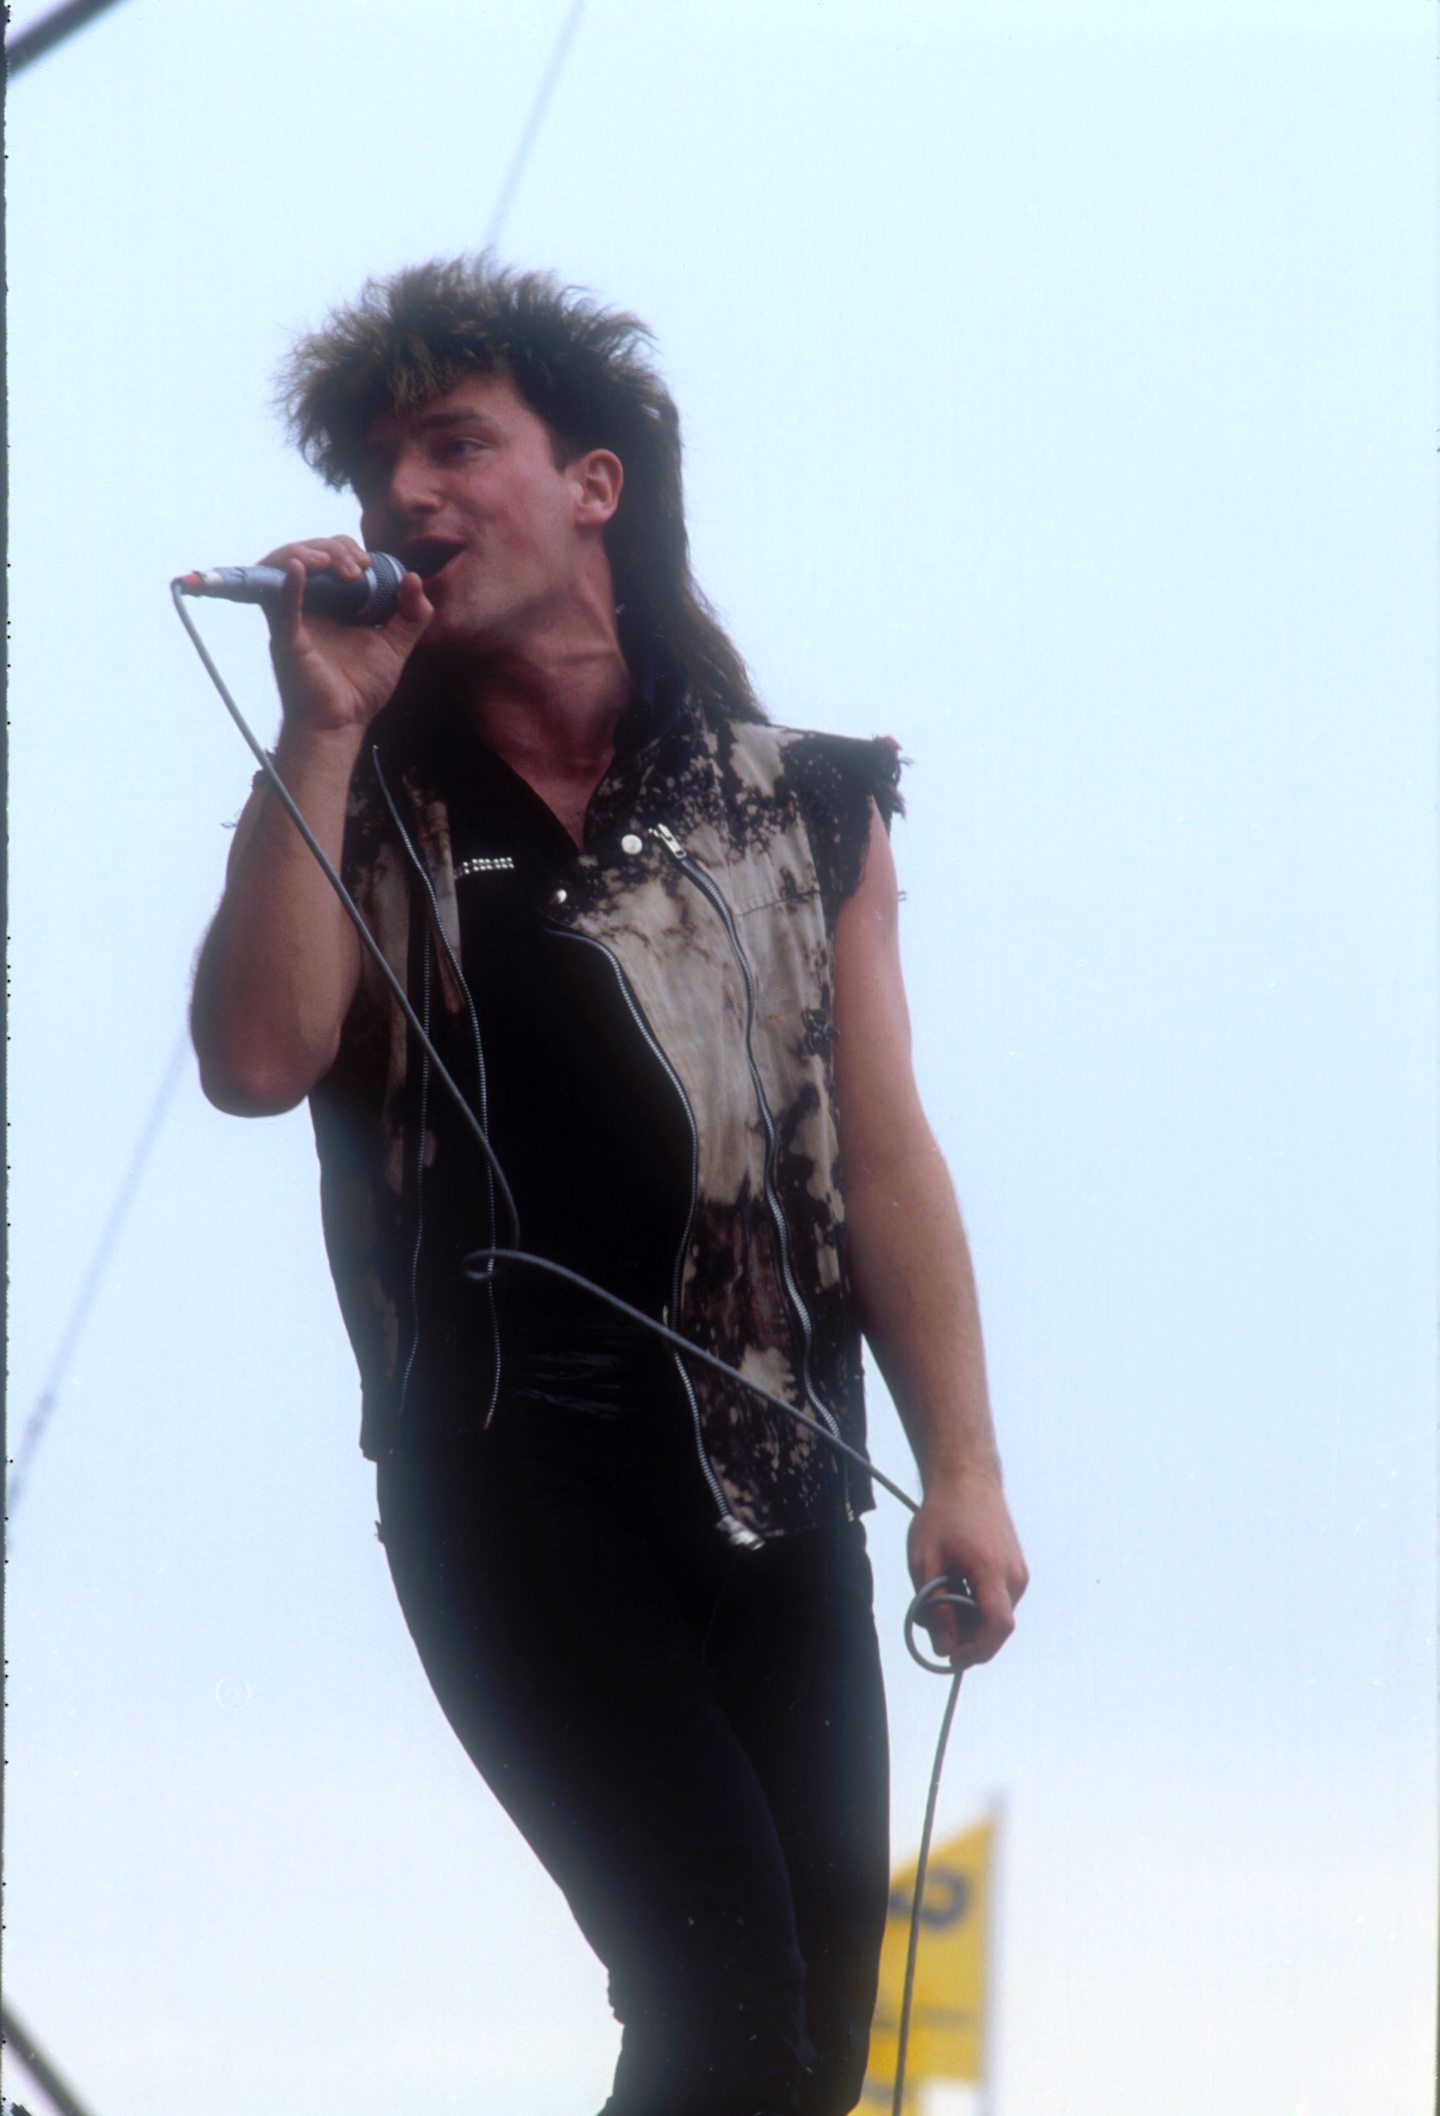 Bono, at this point, has his feet firmly on the ground as U2 performi at the Torhout Werchter Festival in 1983. Image: Shutterstock.